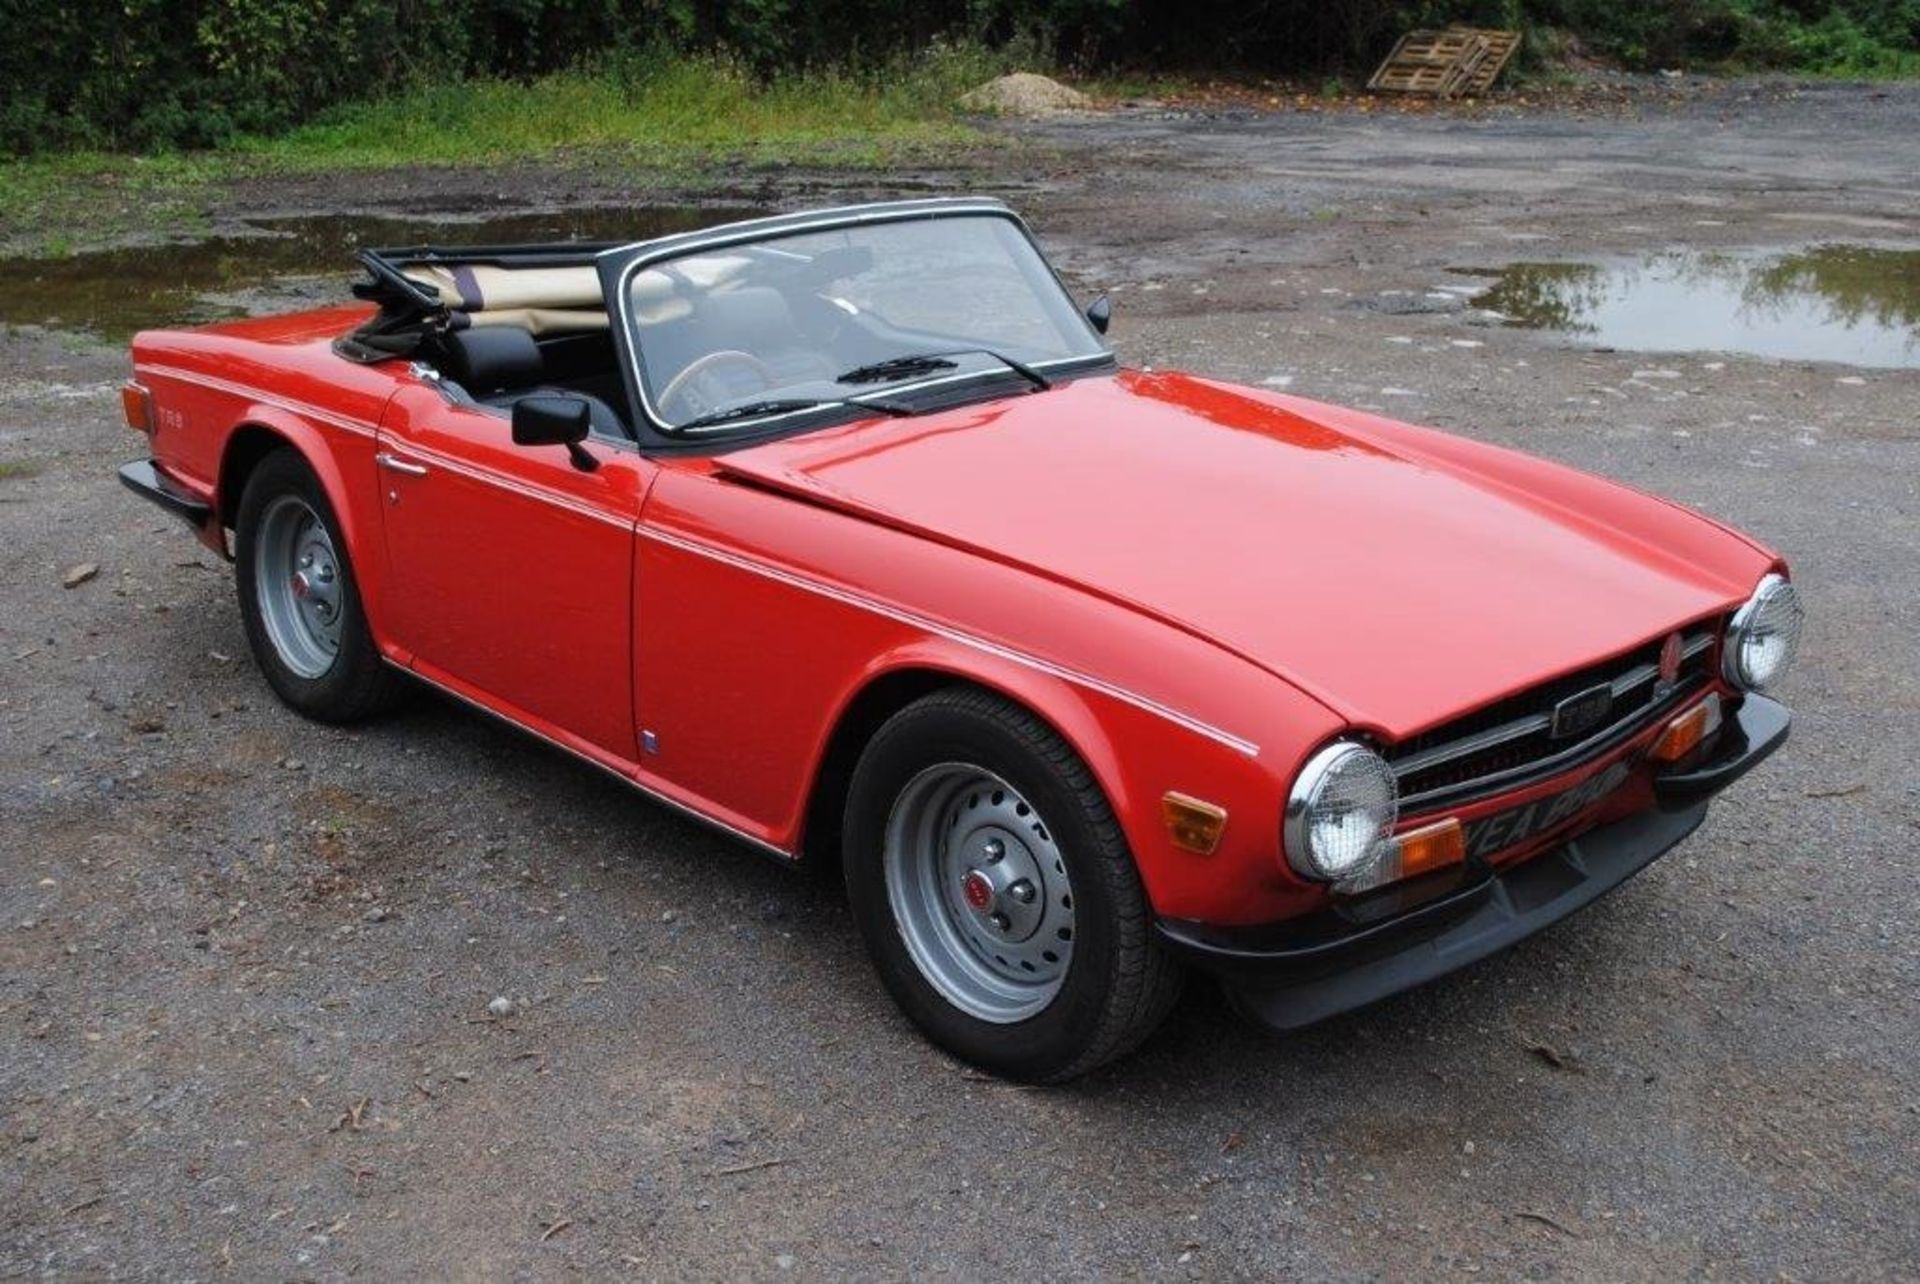 1974 TRIUMPH TR6 Registration Number: YEA 880M Chassis Number: CR51799 Recorded Mileage: 93,000 - Image 2 of 26